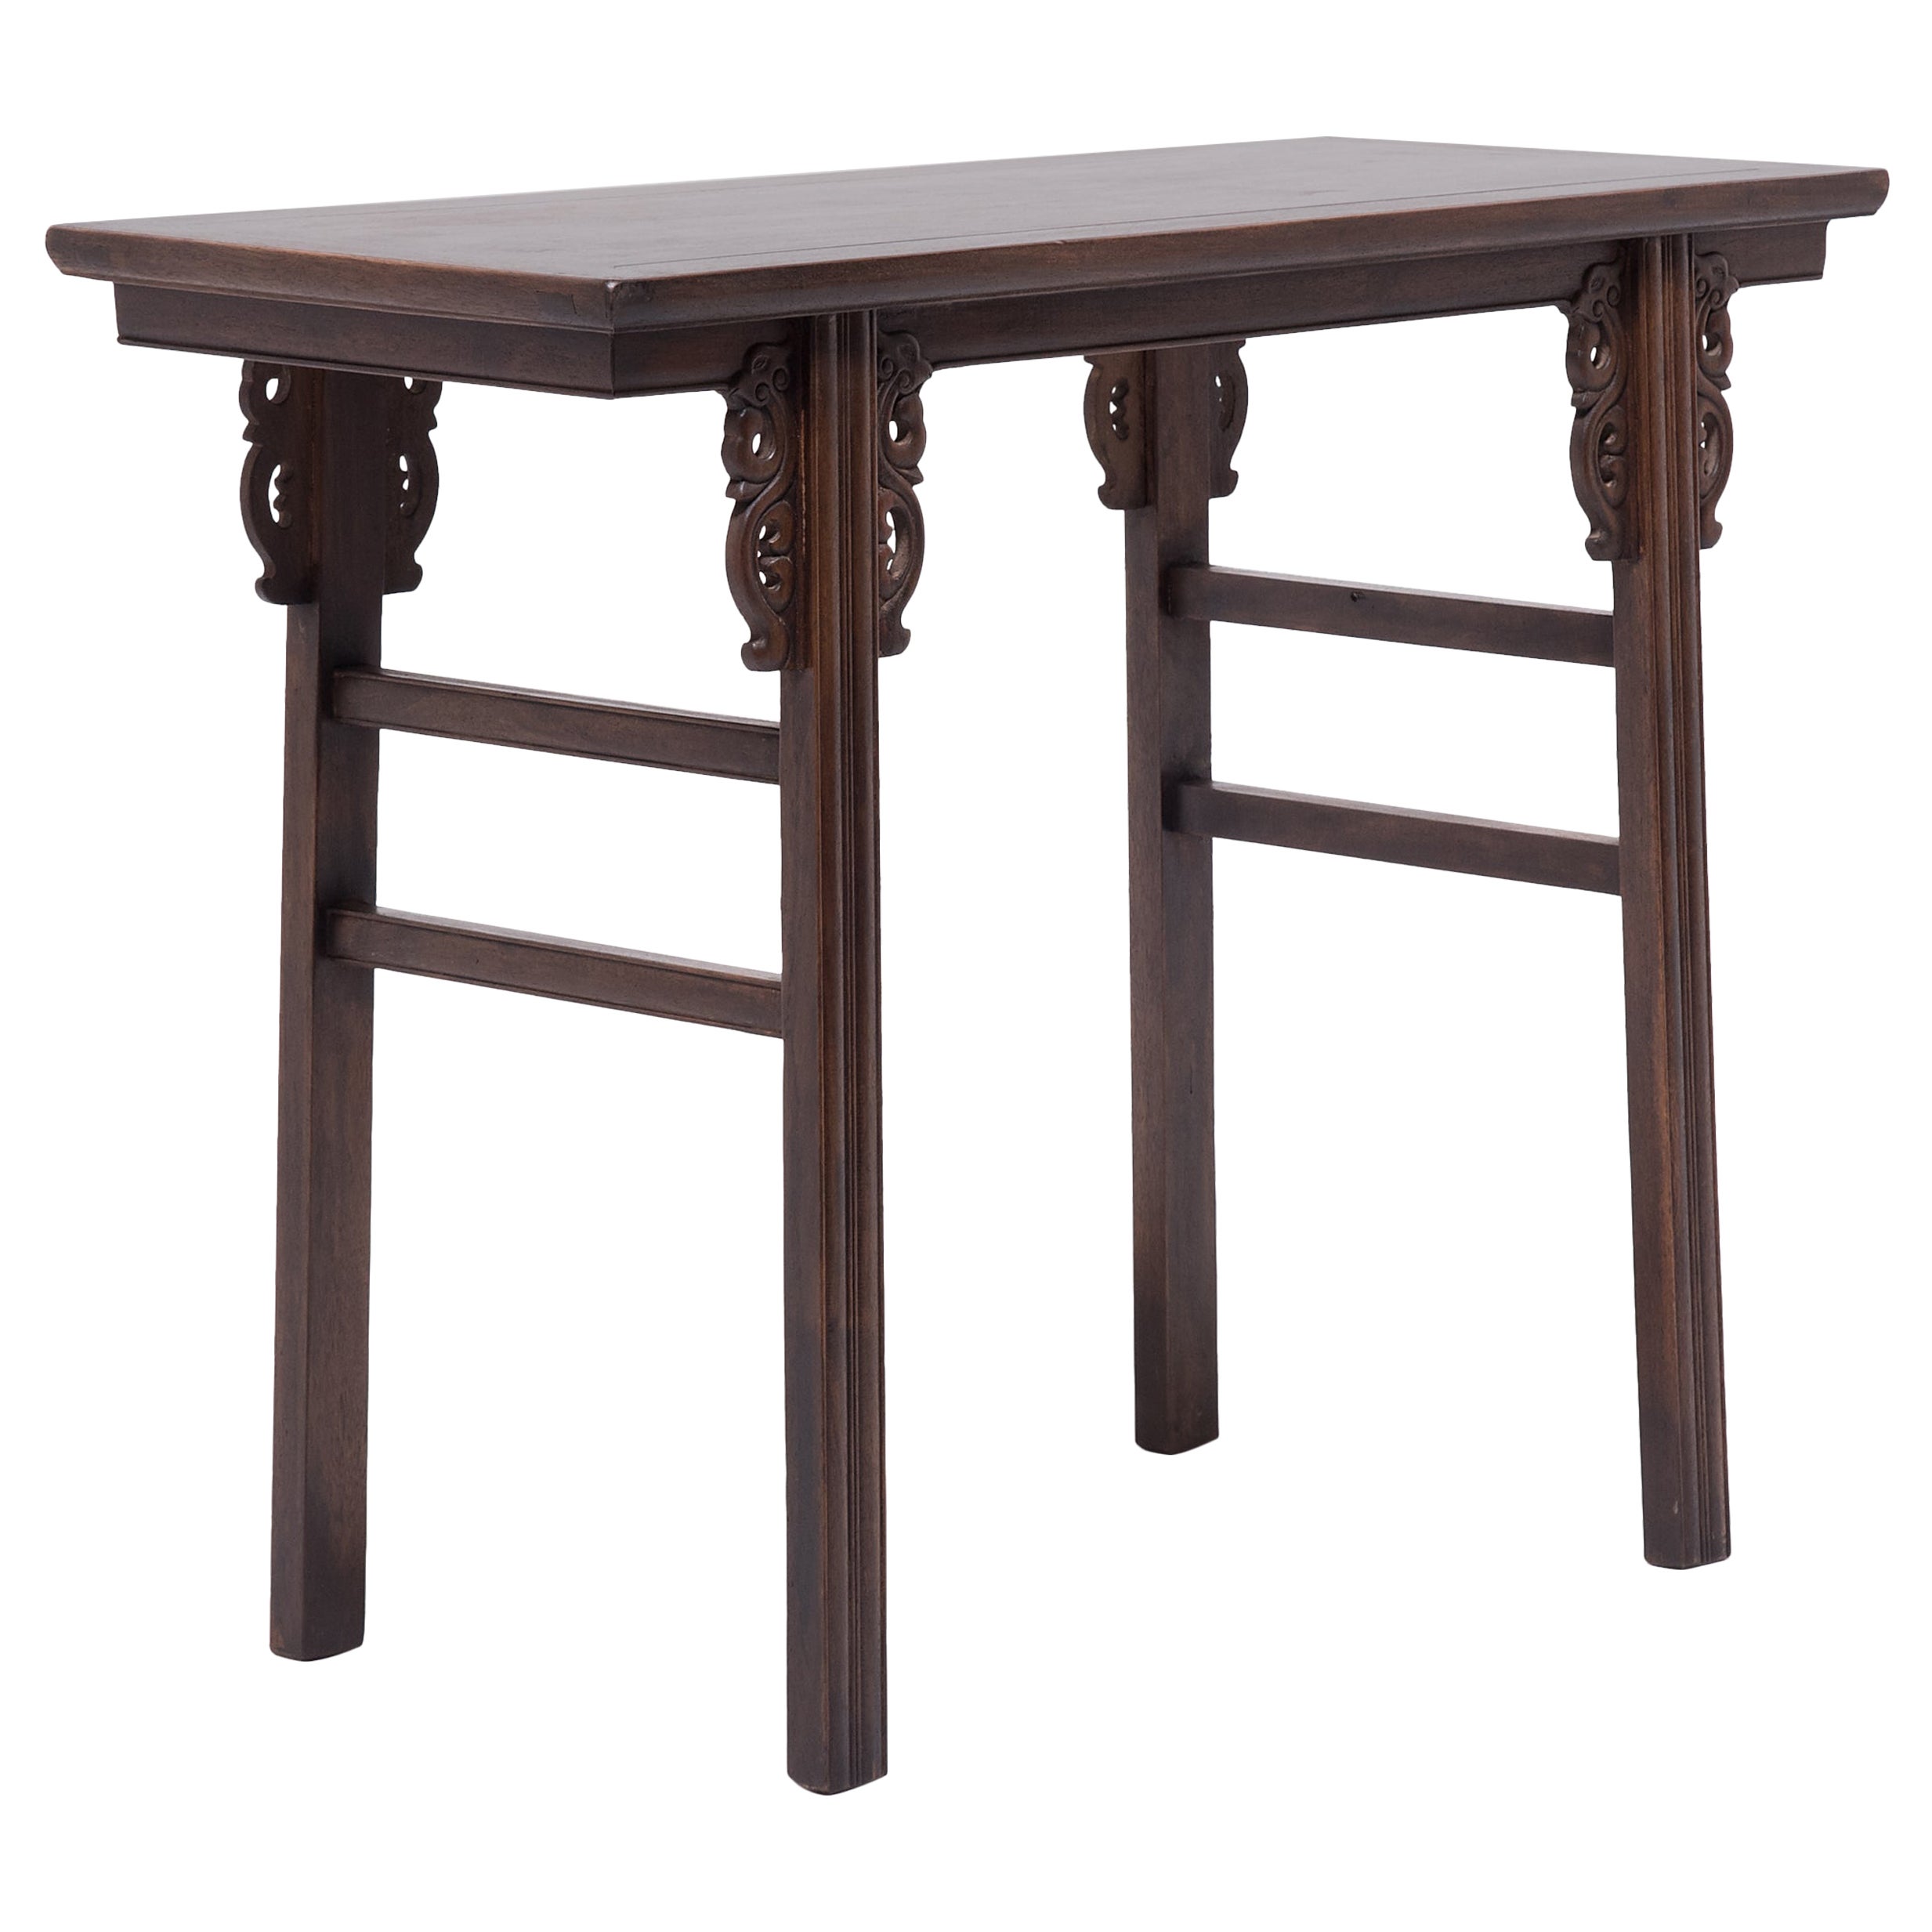 Chinese Walnut Offering Table, c. 1900